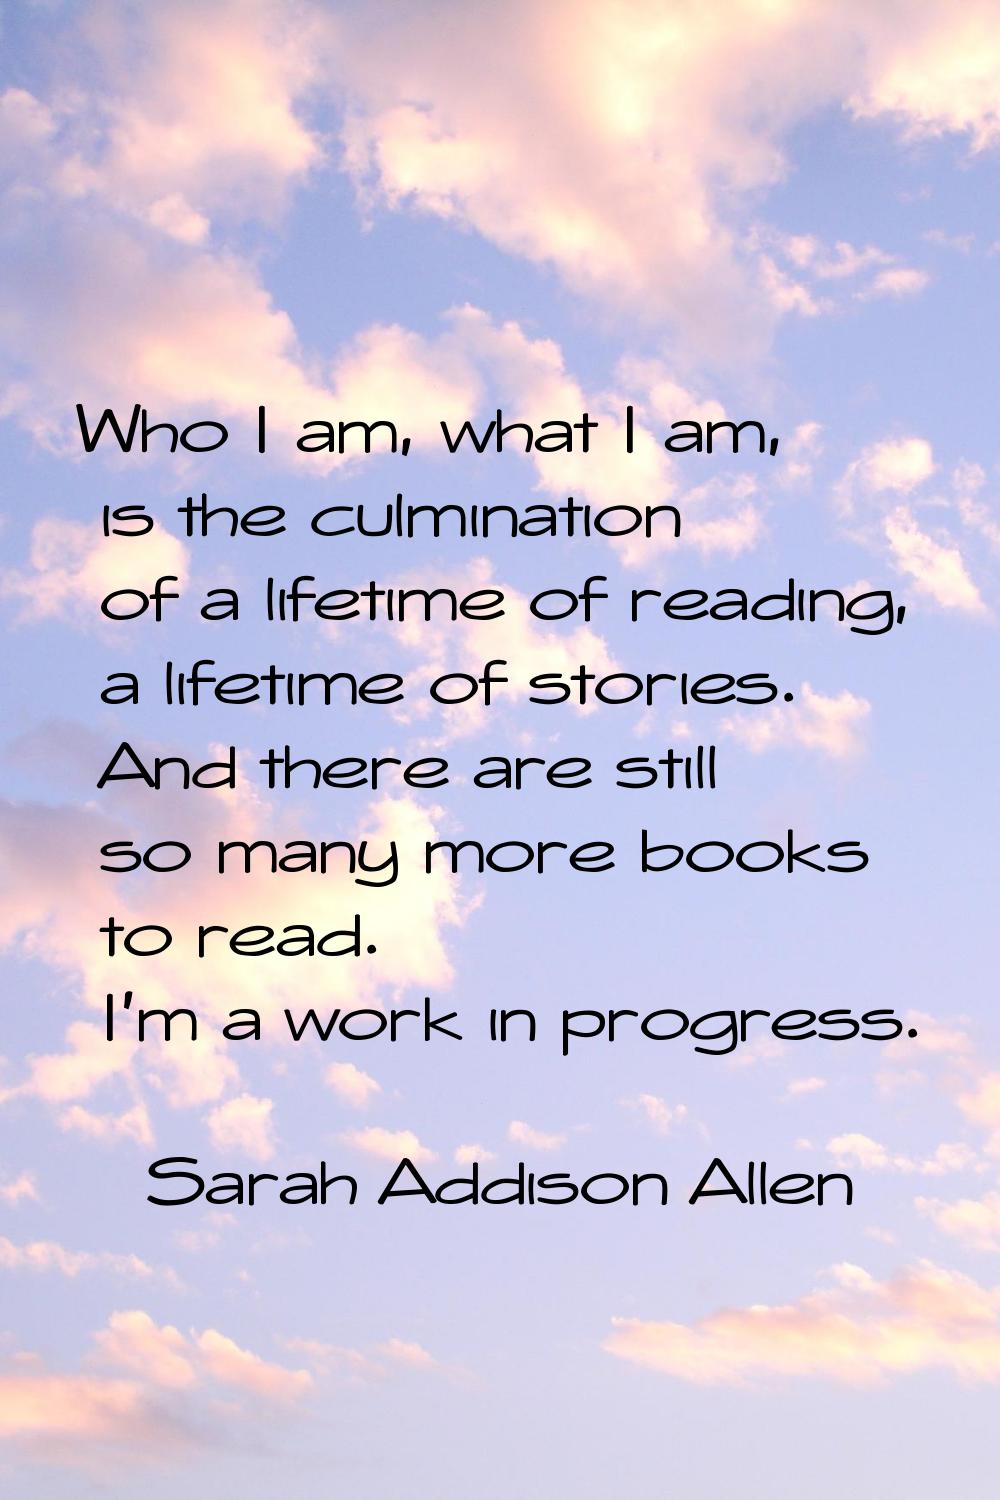 Who I am, what I am, is the culmination of a lifetime of reading, a lifetime of stories. And there 